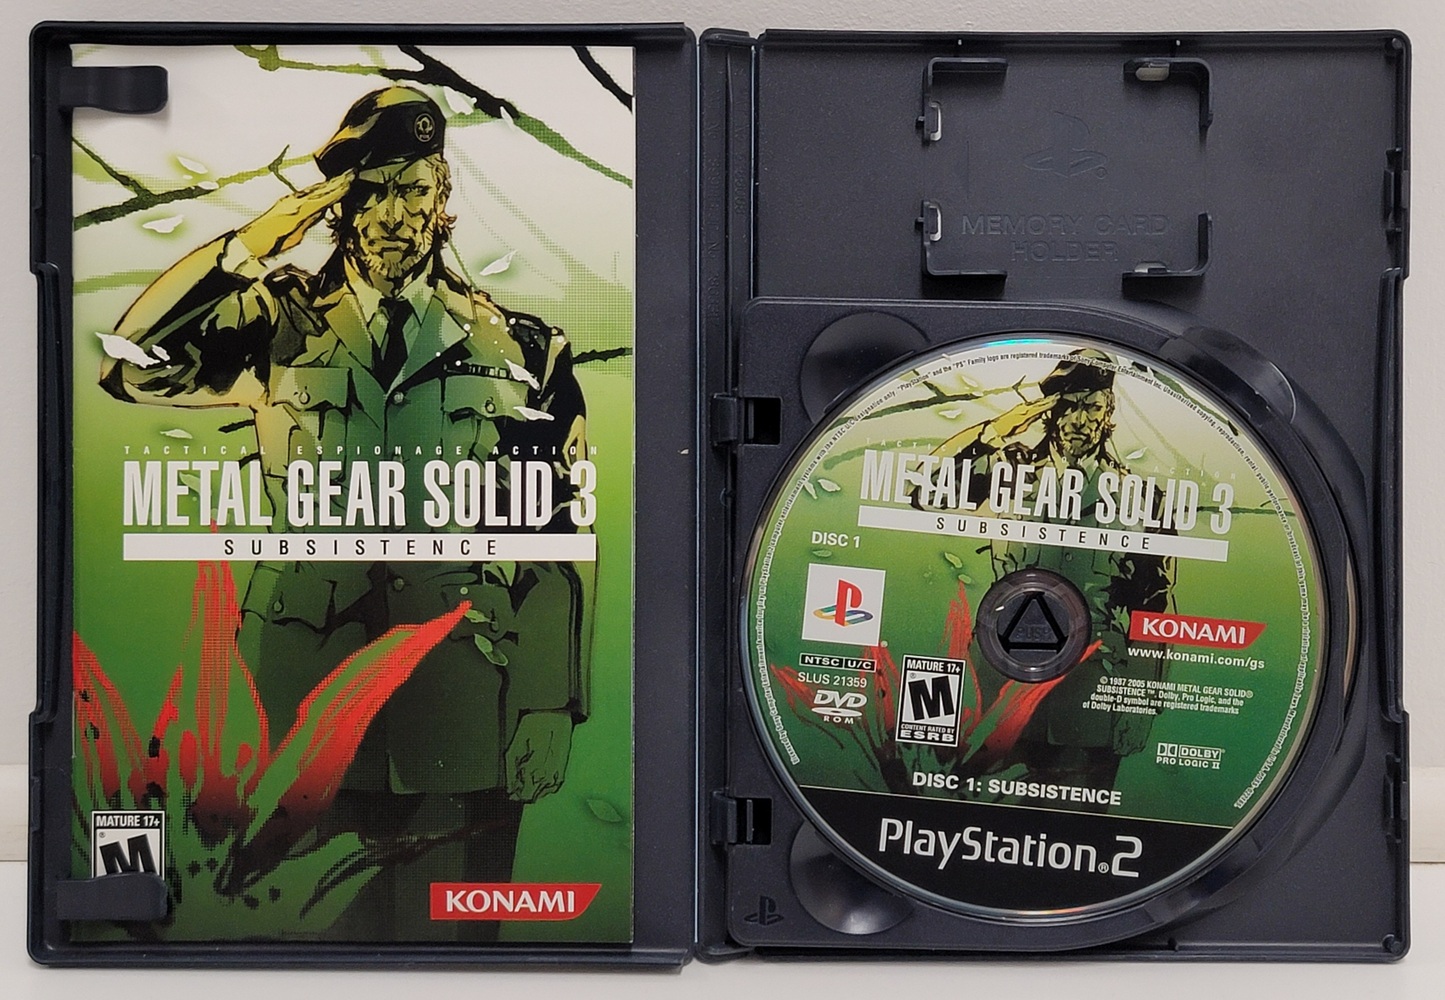 Metal Gear Solid 3 Subsistence **PlayStation 2 PS2 (2005)**